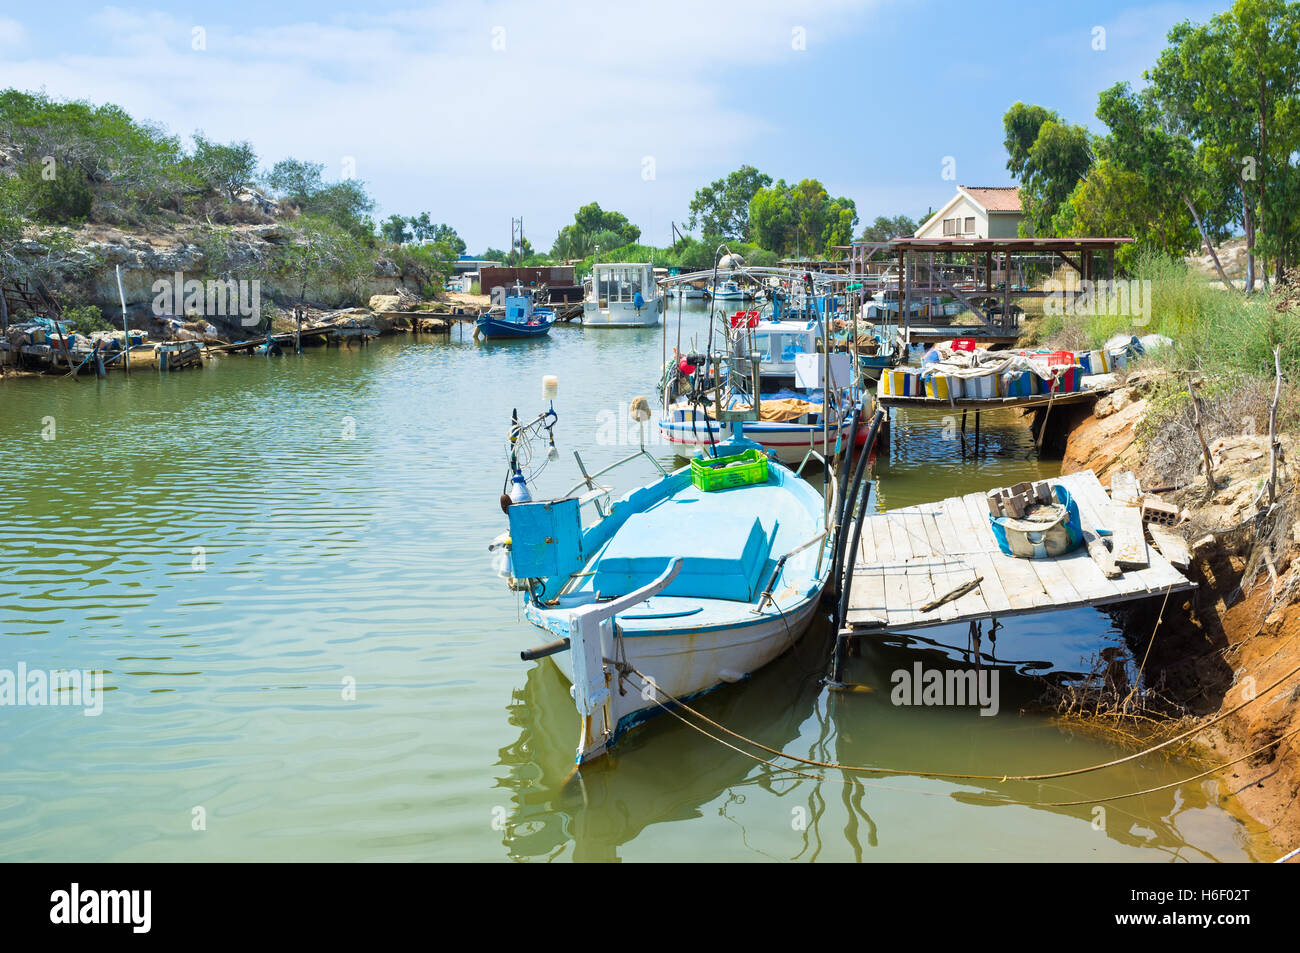 The small fishing village is full of old wooden boats, moored next to the river banks, Liopetri, Cyprus. Stock Photo